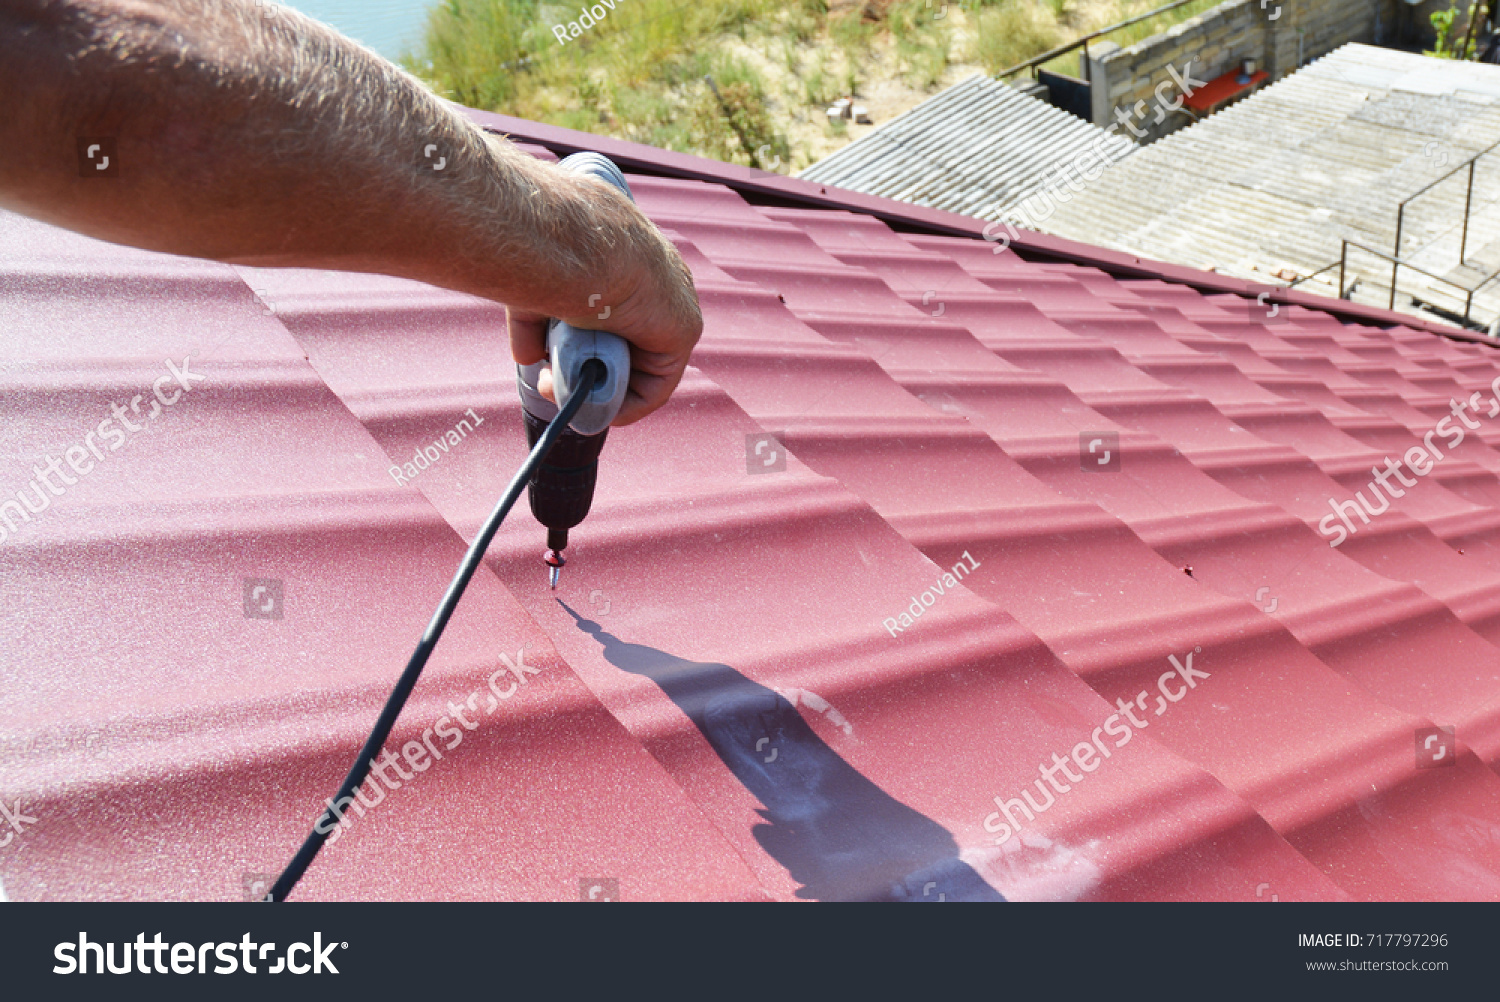 Roofing contractor installing metal roof tile for roof repair after hurricane damage. #717797296